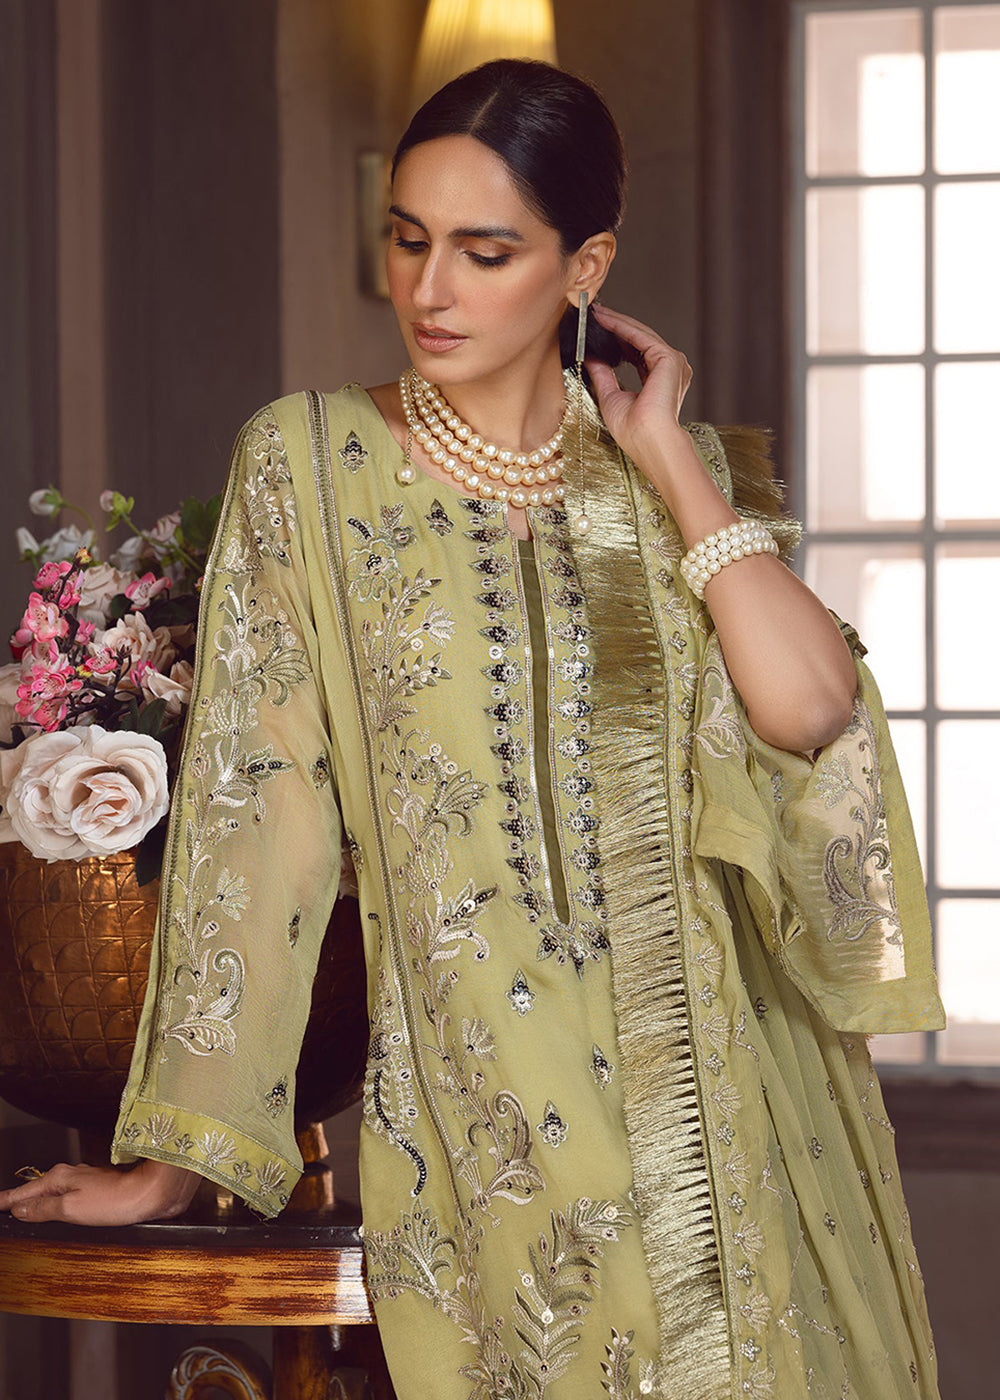 Buy Now Olive Green Pakistani Suit | Emaan Adeel | Le Festa Formal Edit 7 | LF-704 Online in USA, UK, Canada & Worldwide at Empress Clothing. 